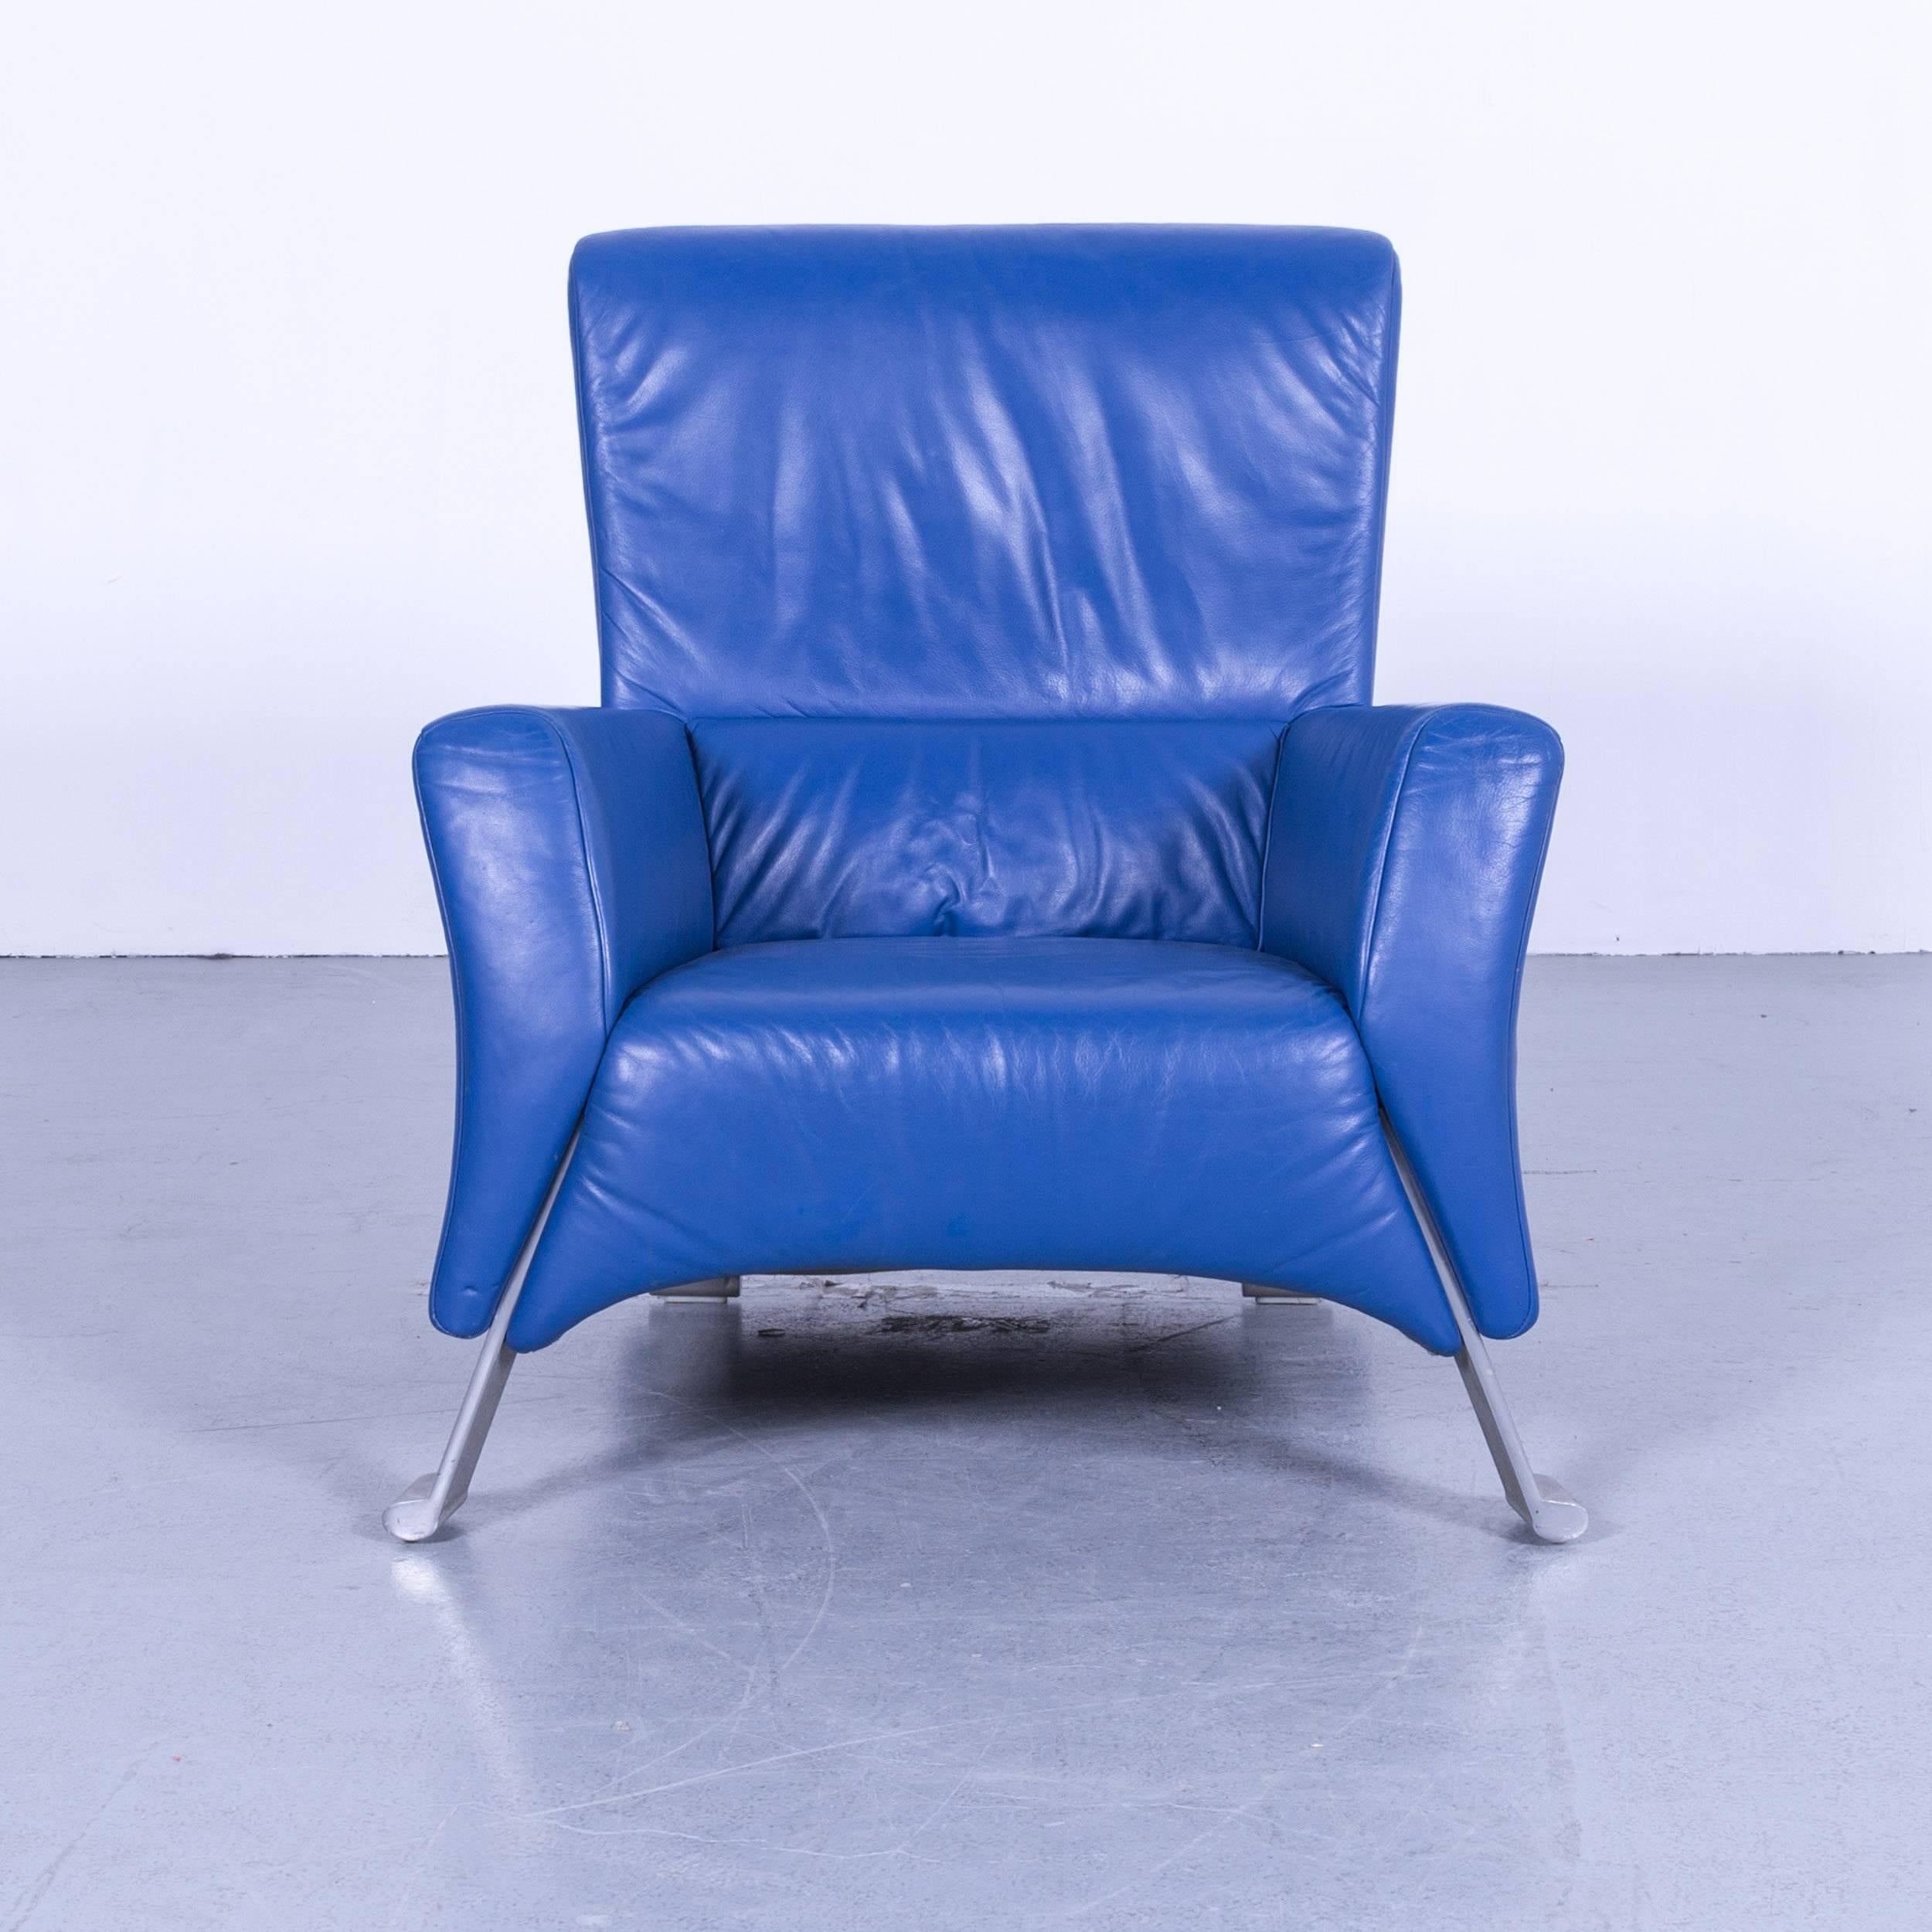 Blue colored original Rolf Benz HSE 322 designer leather armchair, in a minimalistic and modern design, made for pure comfort.